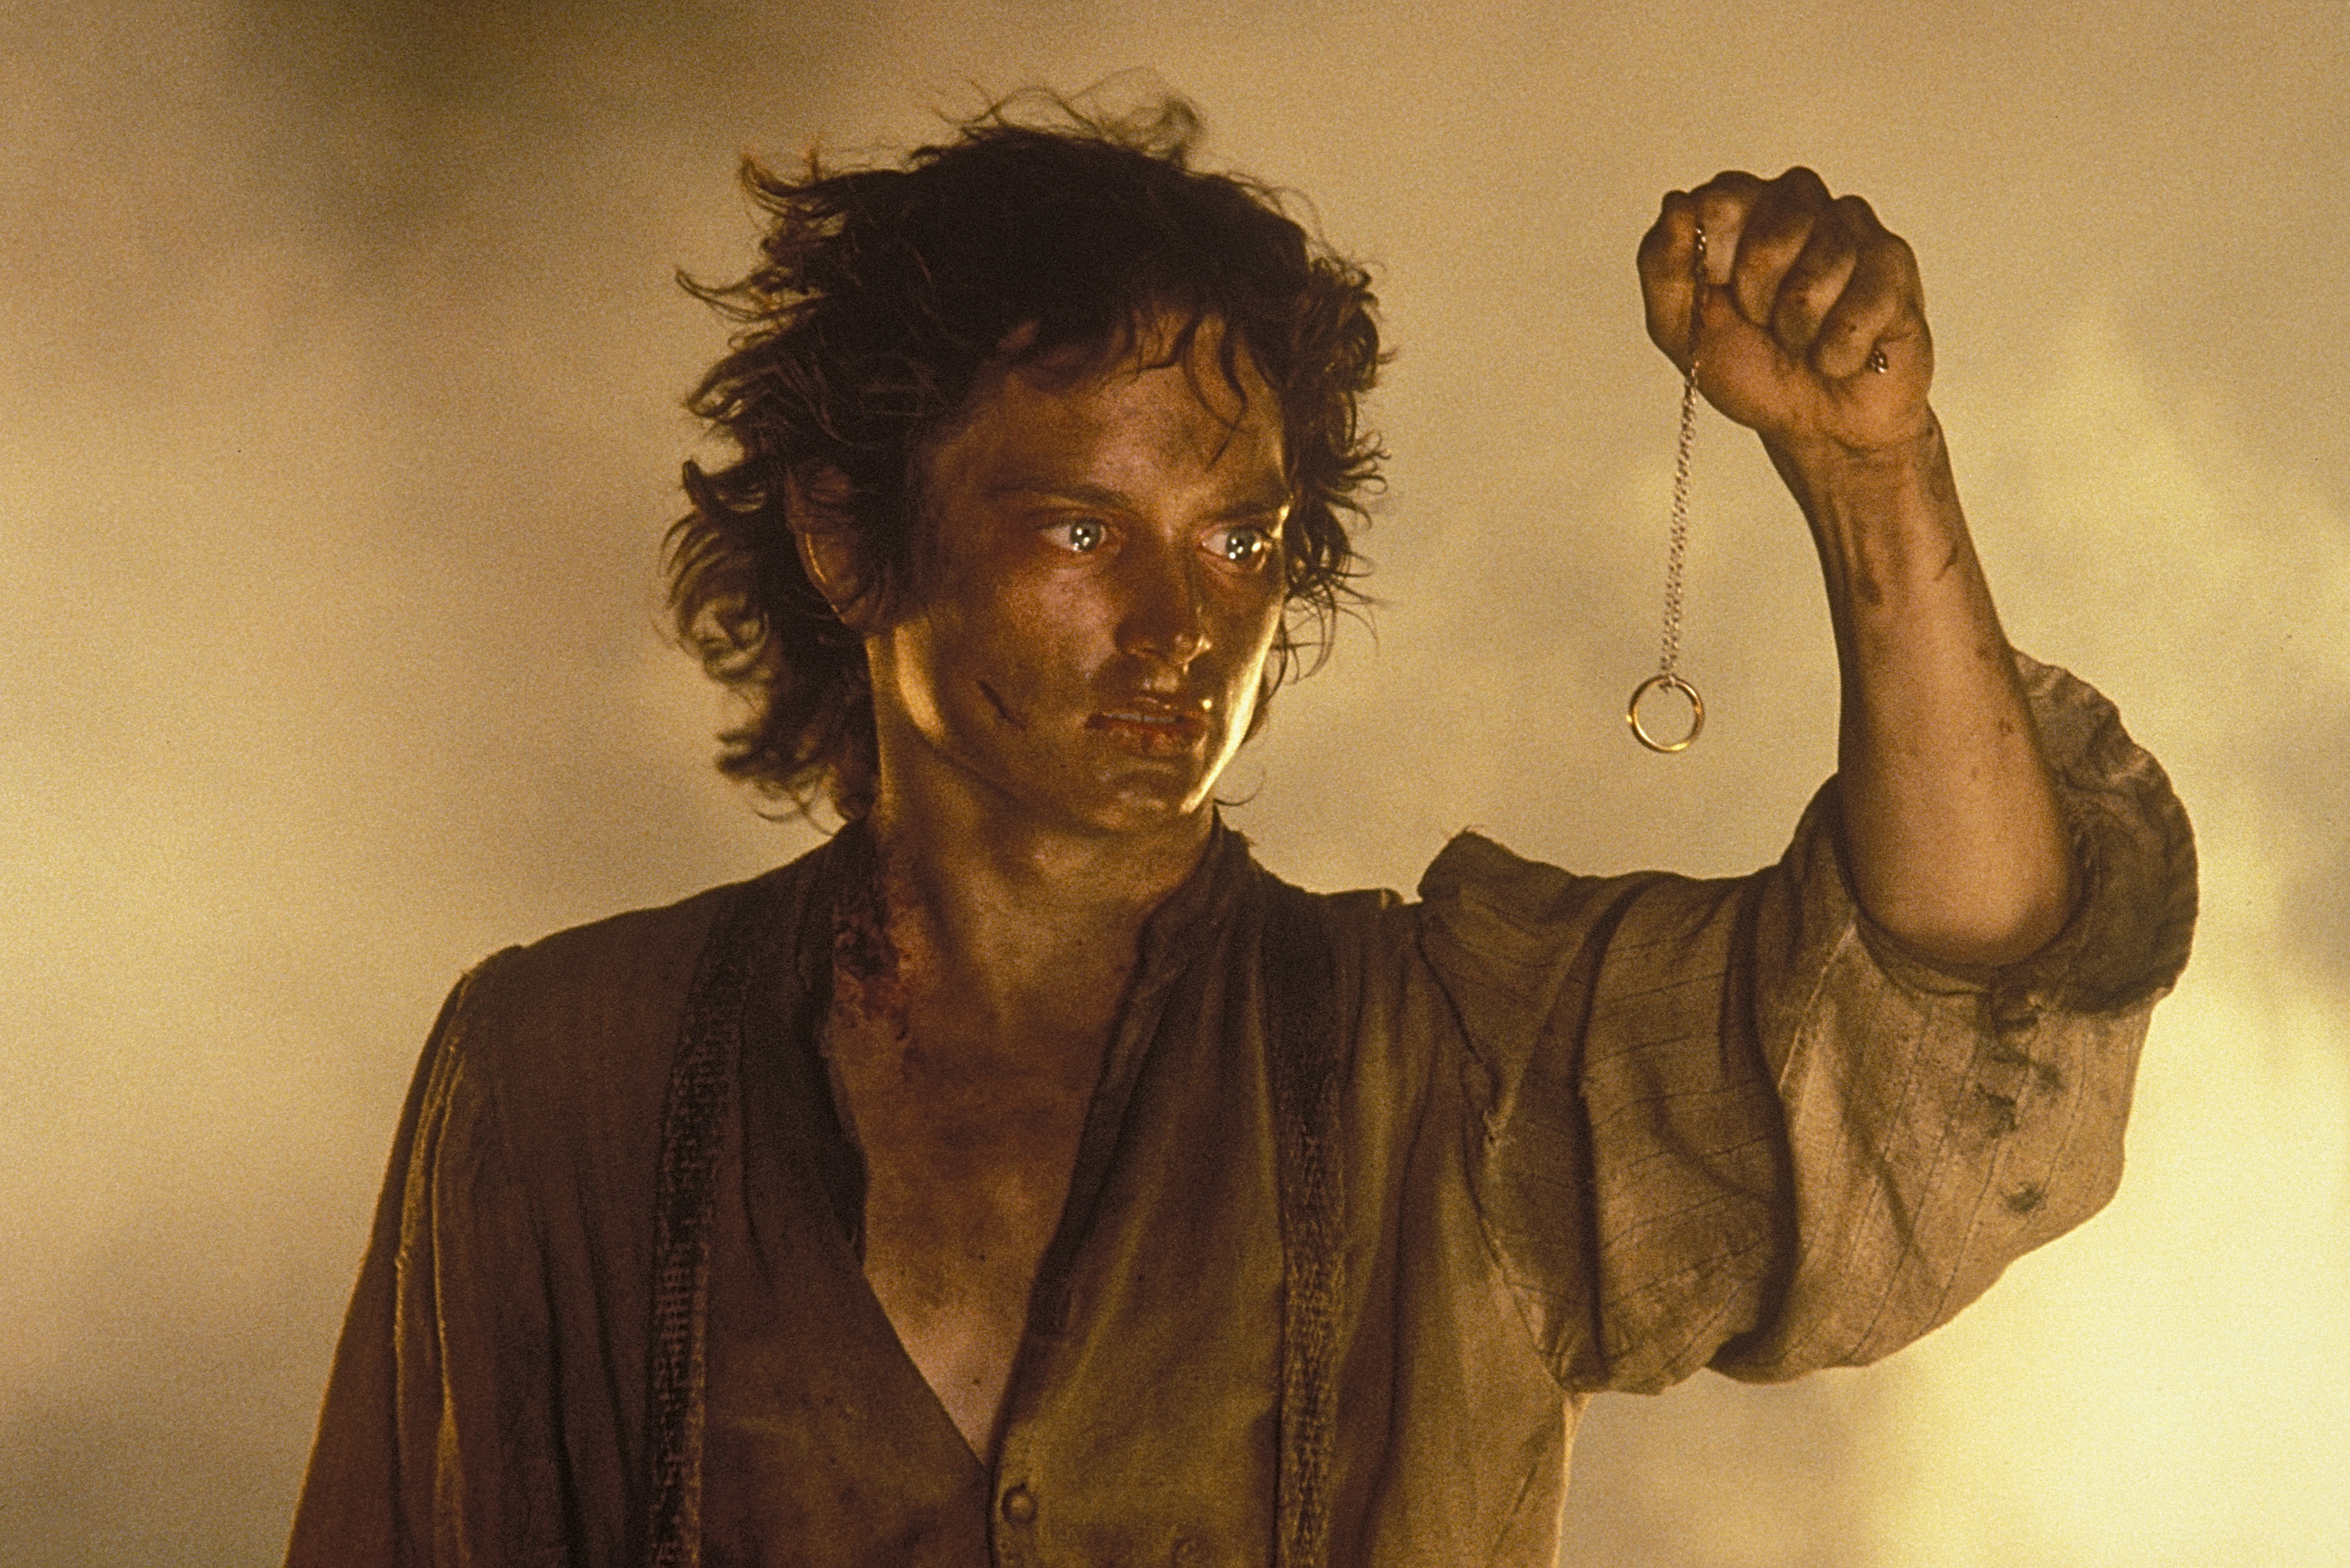 Elijah Wood as Frodo Baggins in 'The Lord of the Rings: The Return of the King.' (Pierre Vinet—New Line Cinema)